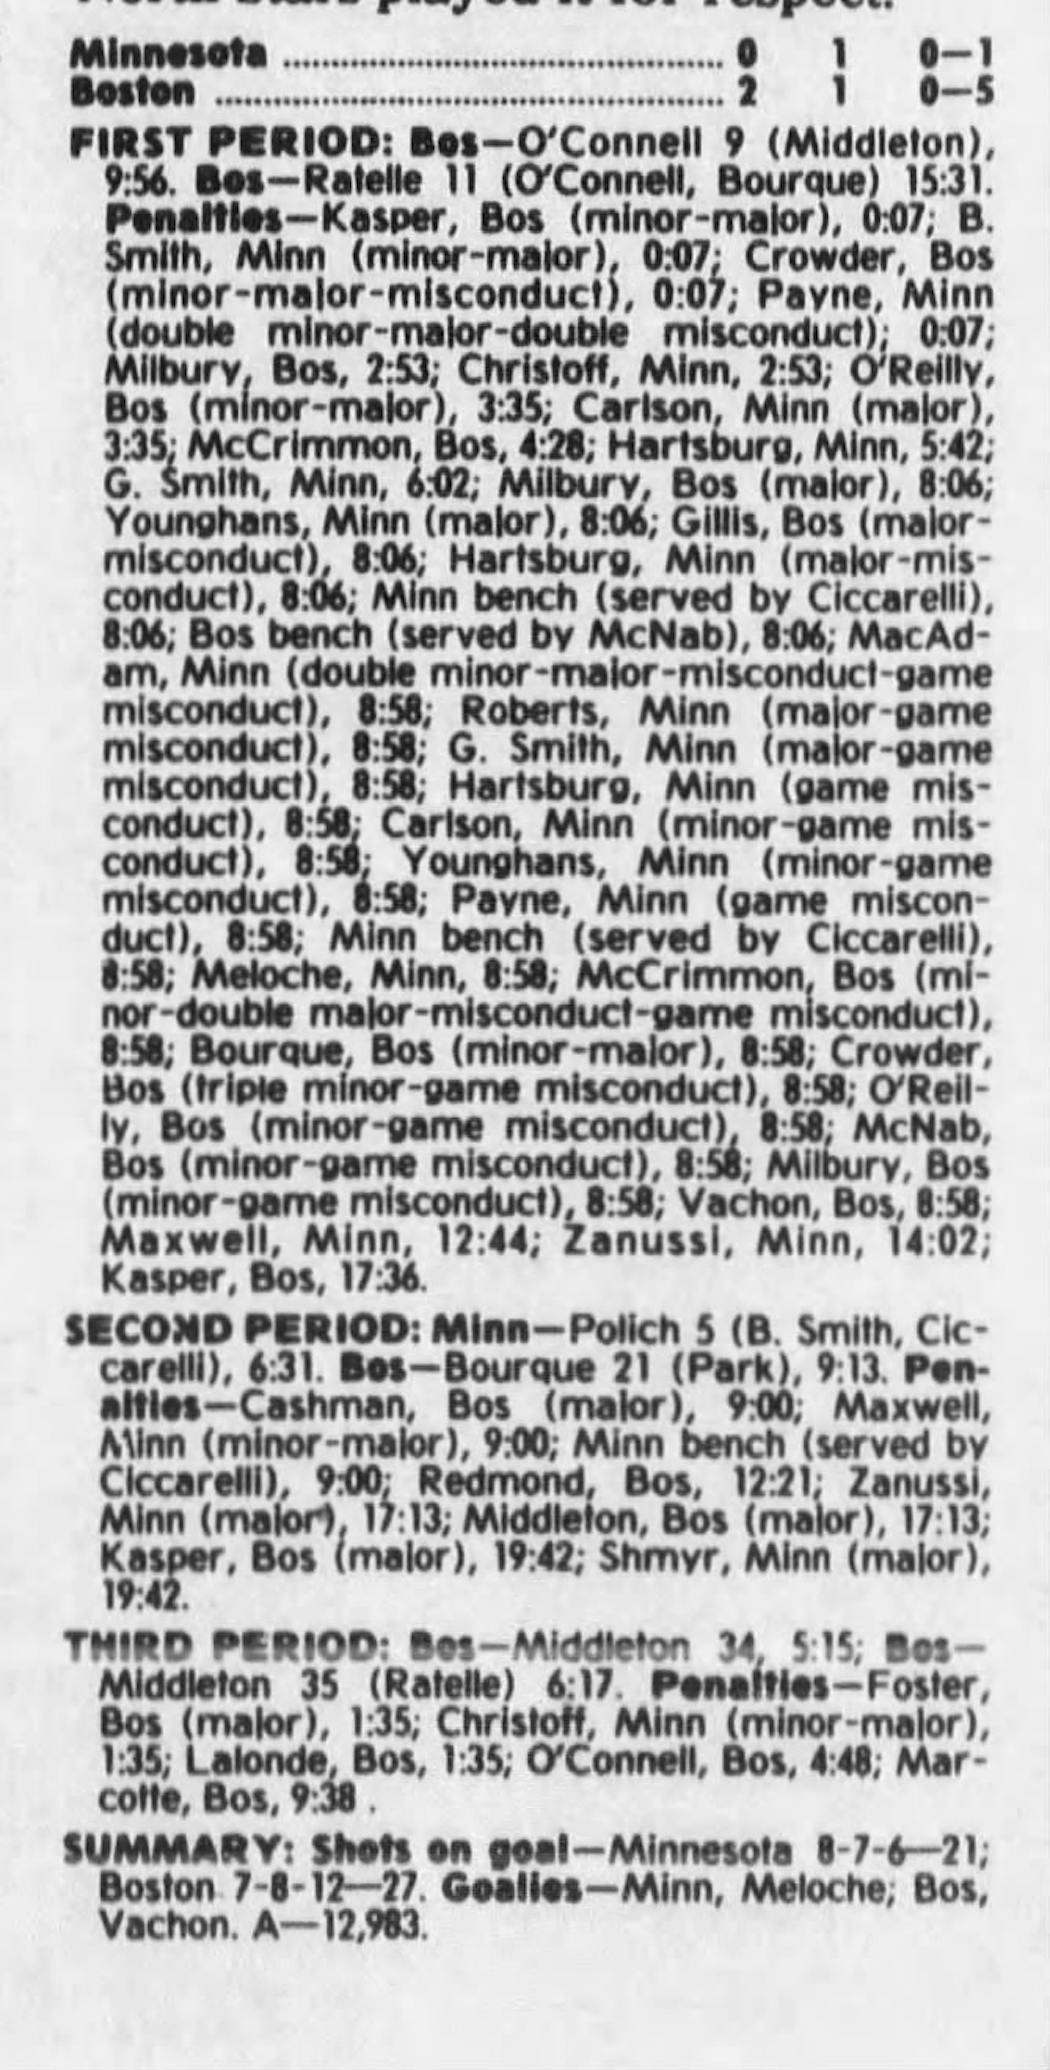 The Star Tribune boxscore gives some idea of the massive amount of penalties handed out between the North Stars and Bruins on Feb. 27, 1981.